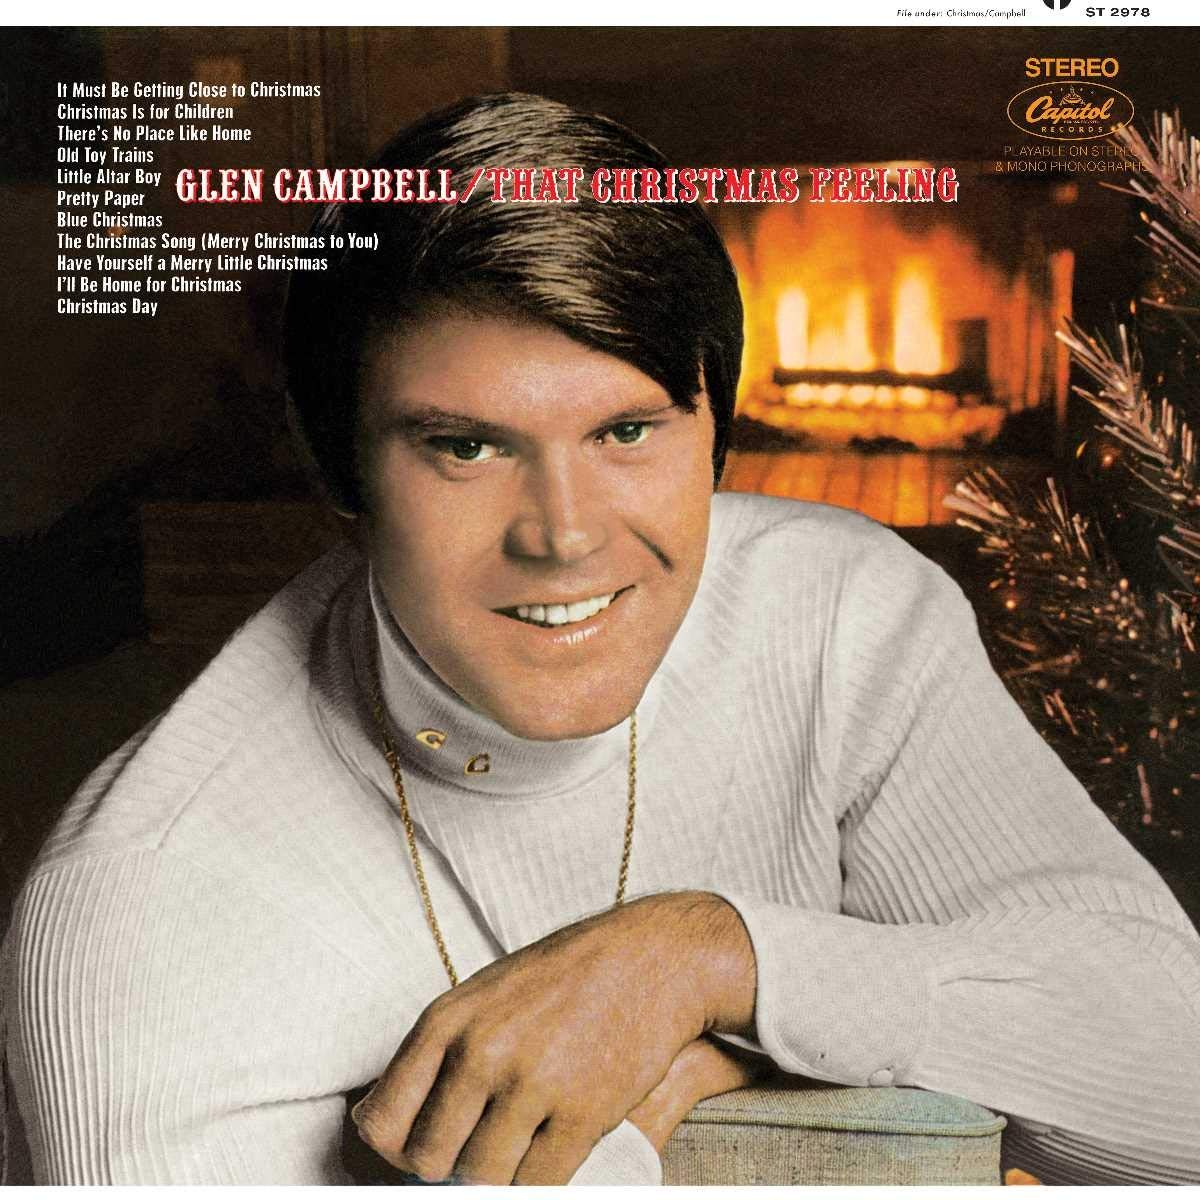 glen-campbell-that-country-feeling-vinyl-record-album-front